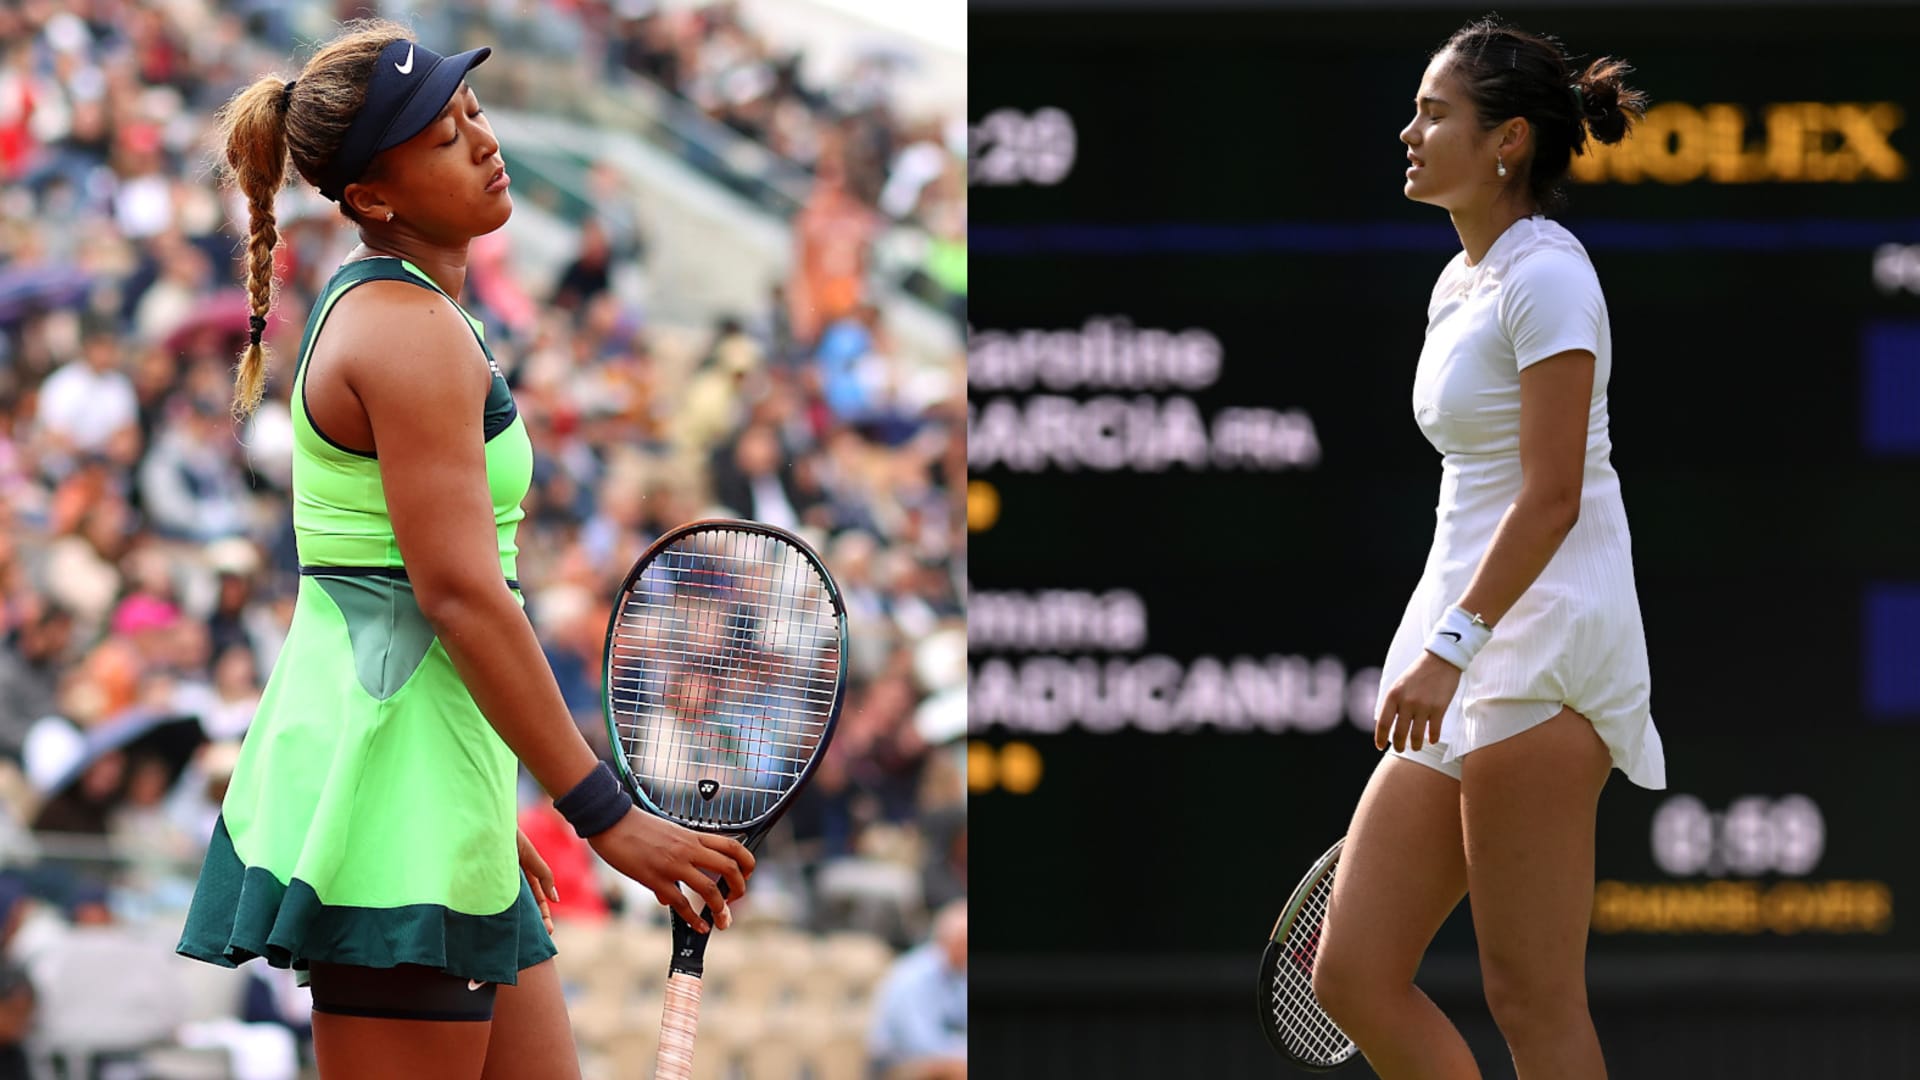 Naomi Osaka and Emma Raducanu, the past two US Open champions, kick off their summer hard-court swings with questions in tow